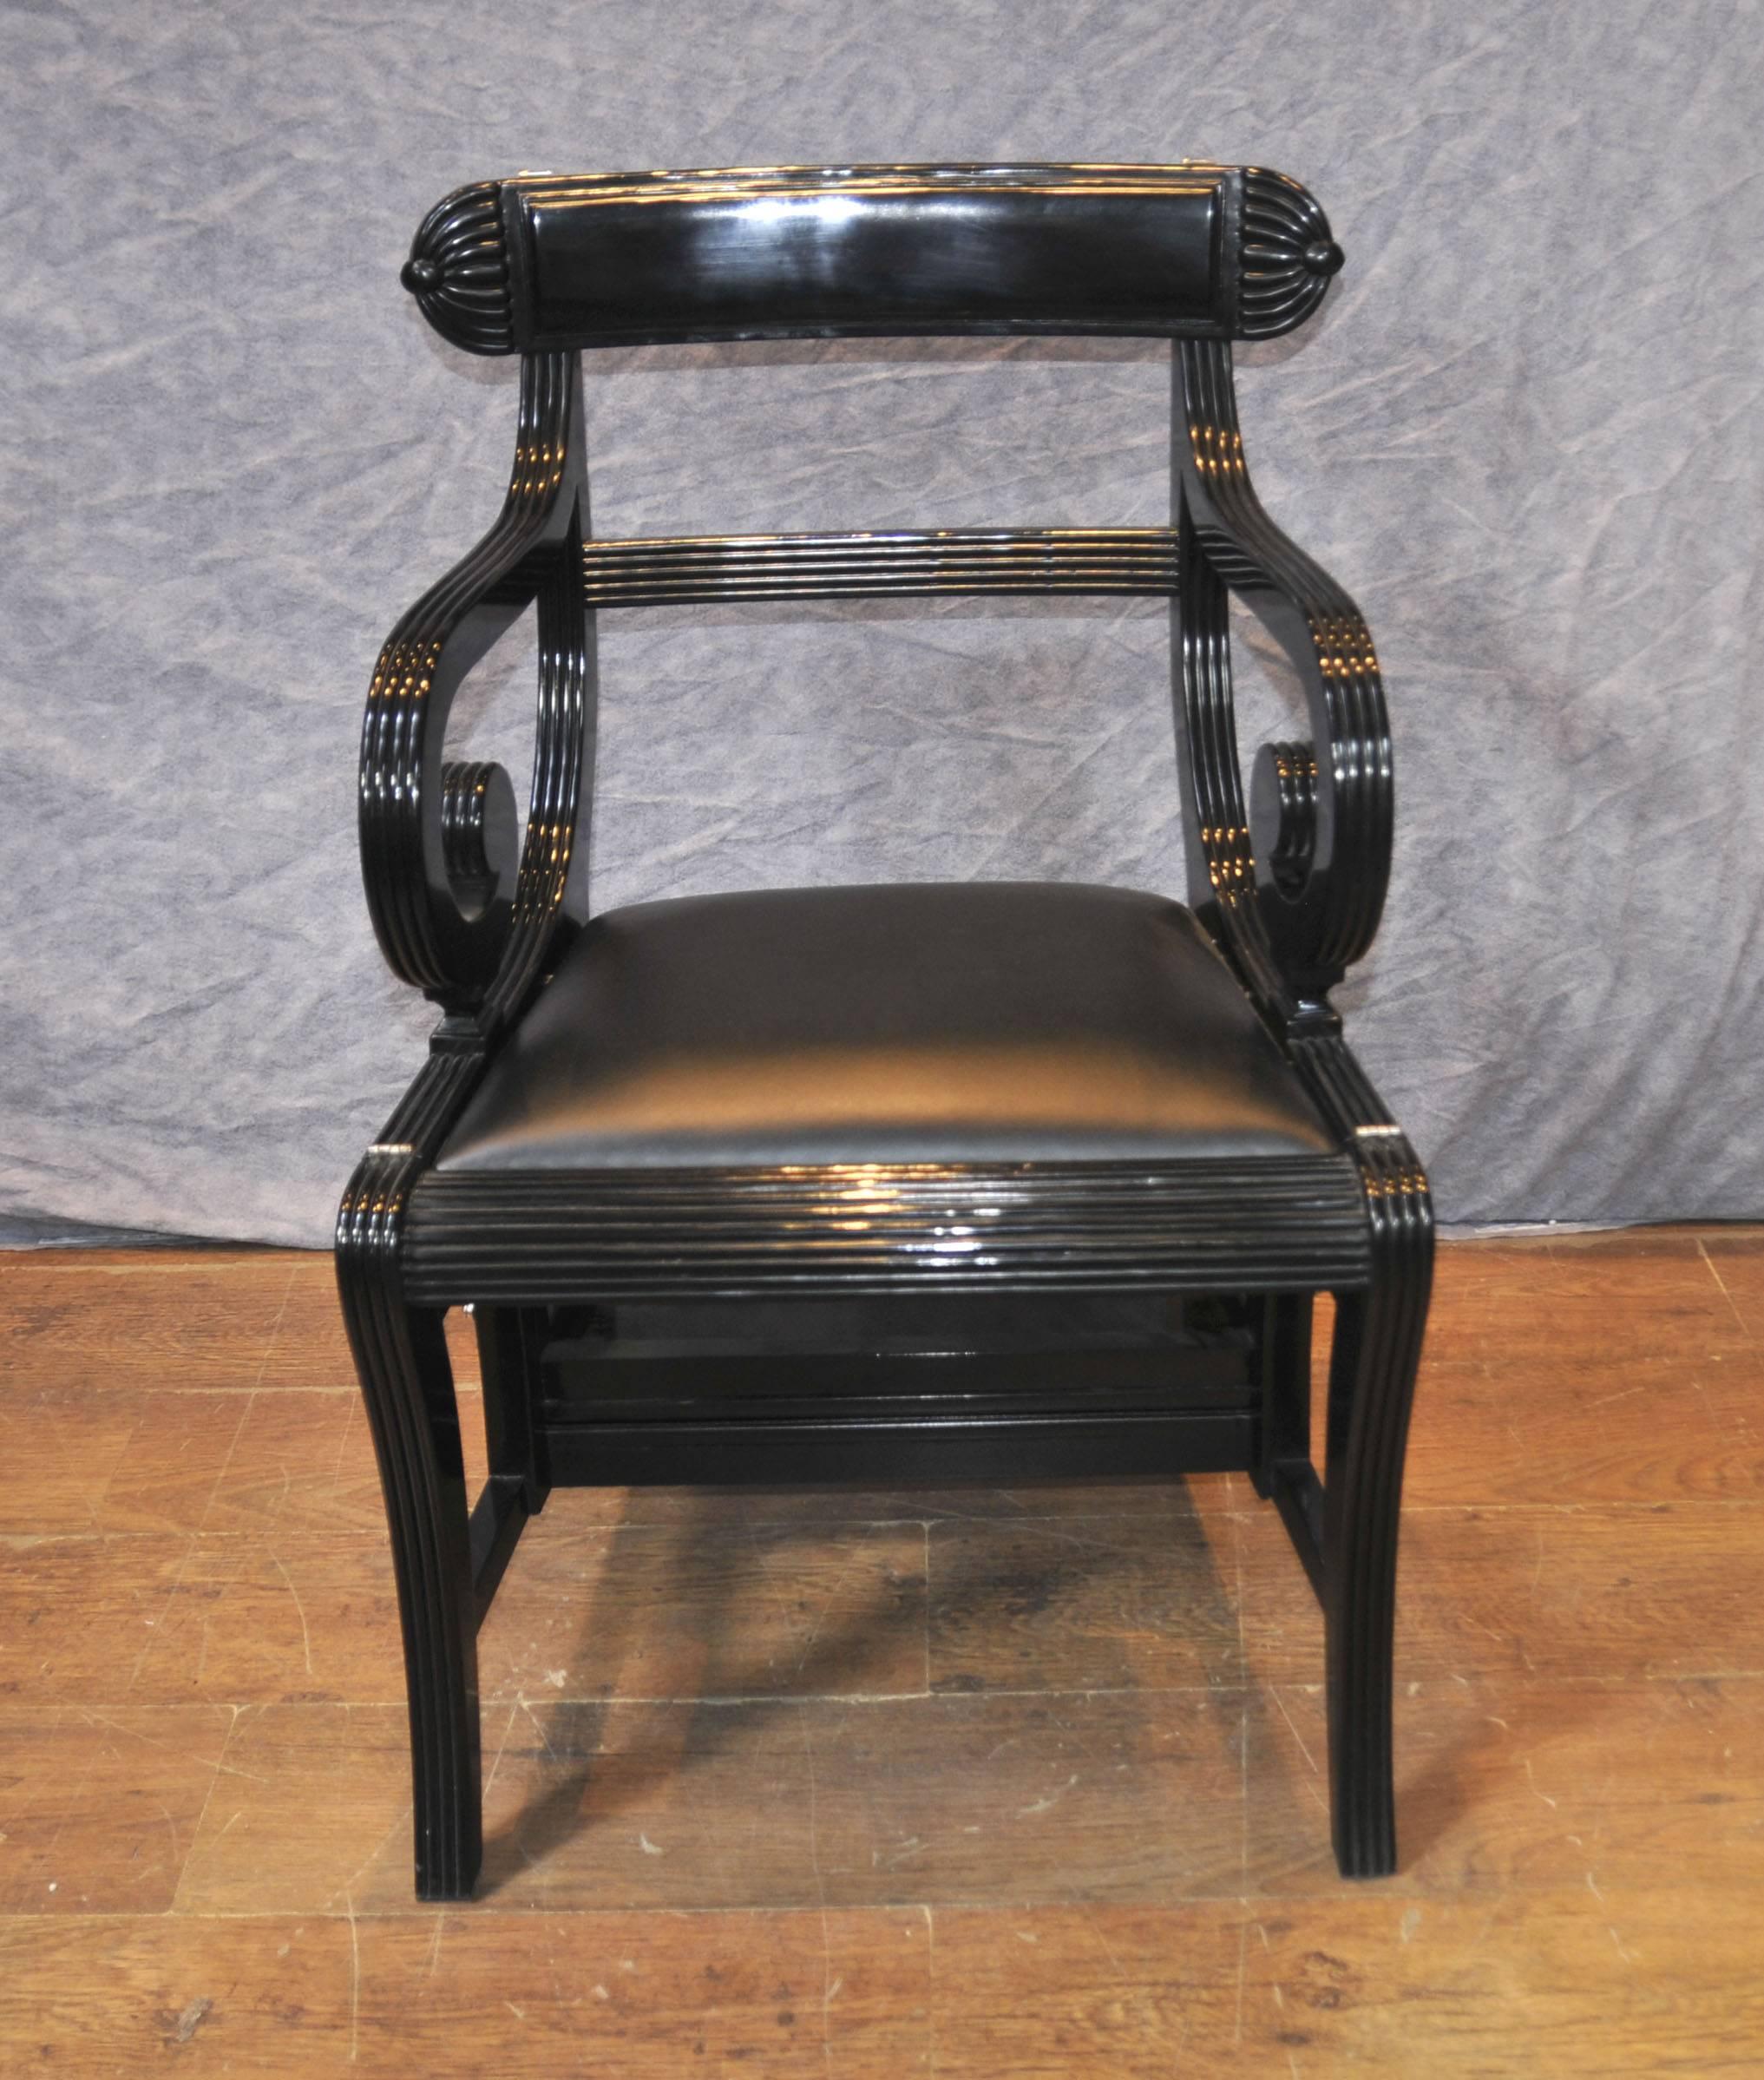 Absolutely unique Regency style armchair library step ladder combination a metamorphic chair.
Chair easily converts into library steps by swinging the backrest backwards after unlatching.
Wow have you seen anything like this?
Great space saving